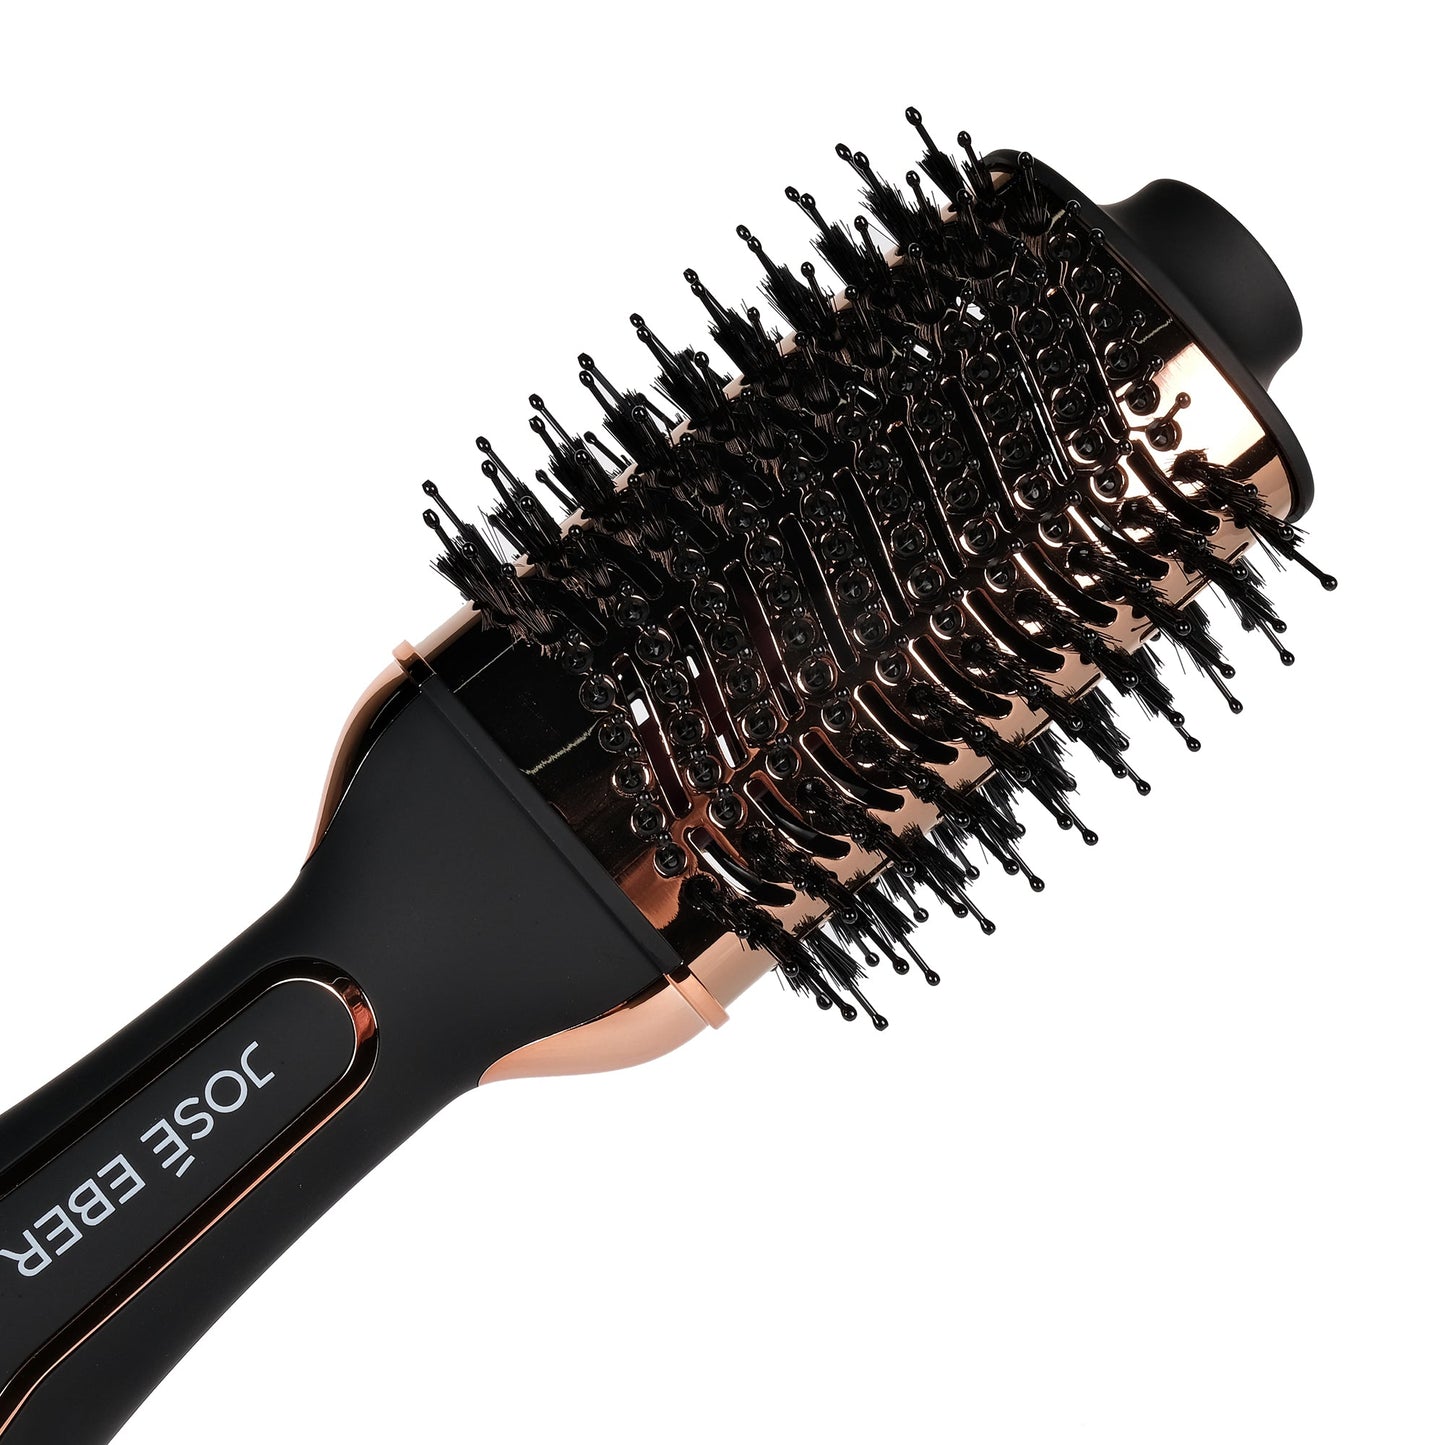 Jose Eber Hot Air Brush - 4-in-1 Hair Volumizer, Dryer, Smoother and Straightner - Dual Voltage & 1300 Watts - One Step Hair Styler and Volumizer for Drying Straightening Curling Volumizing - Couture Hair Pro